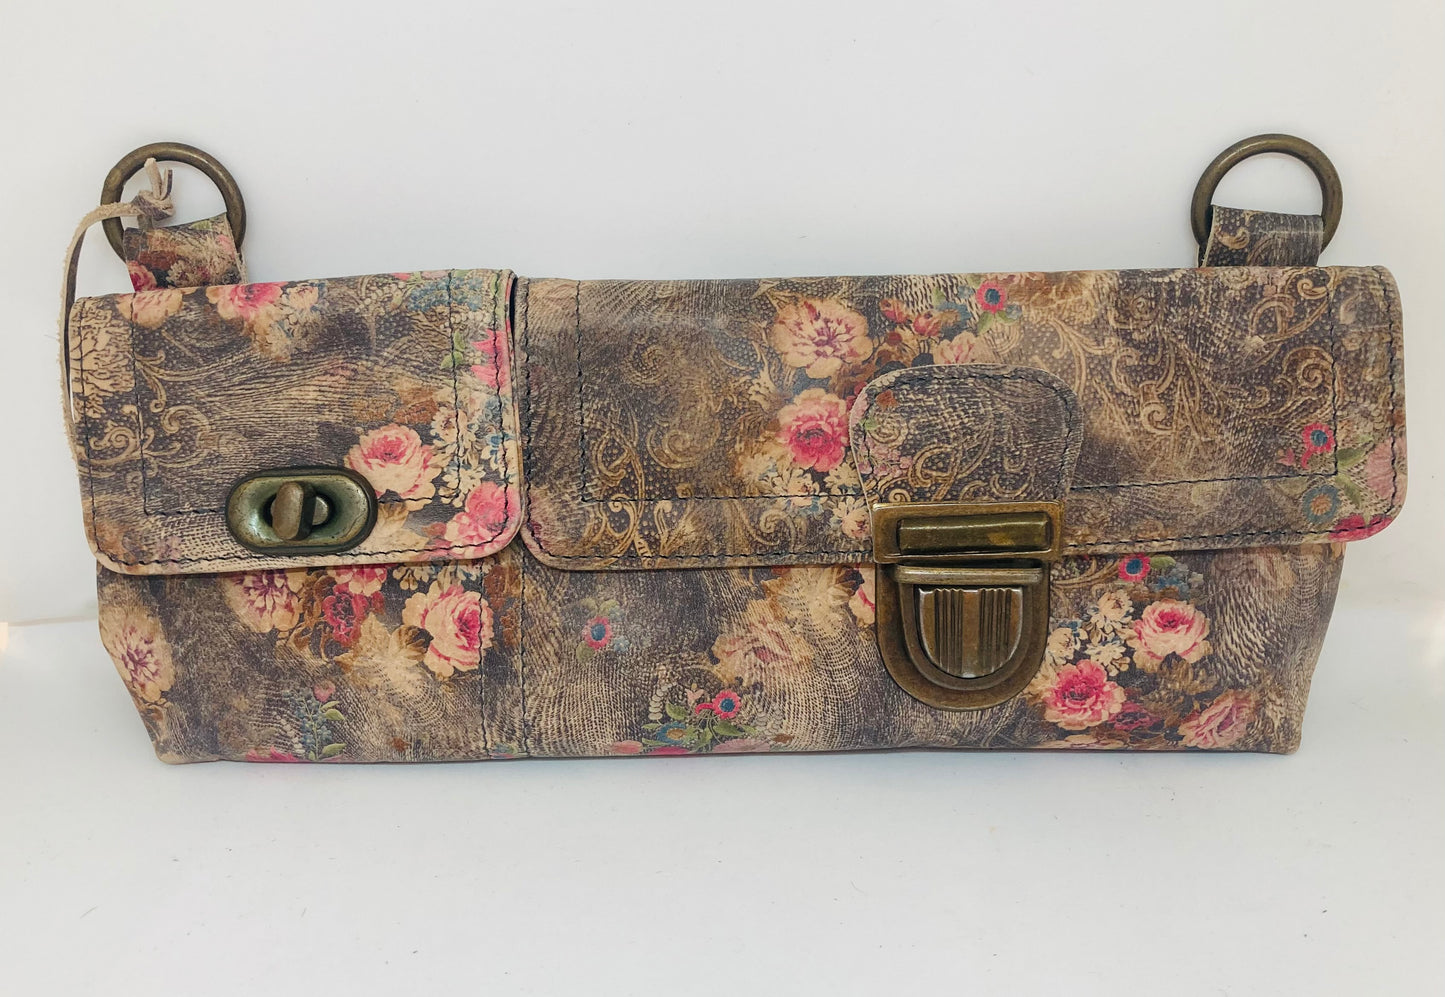 ODI LYNCH JILLY CONVERTABLE BUMBAG IN VINTAGE FLORAL